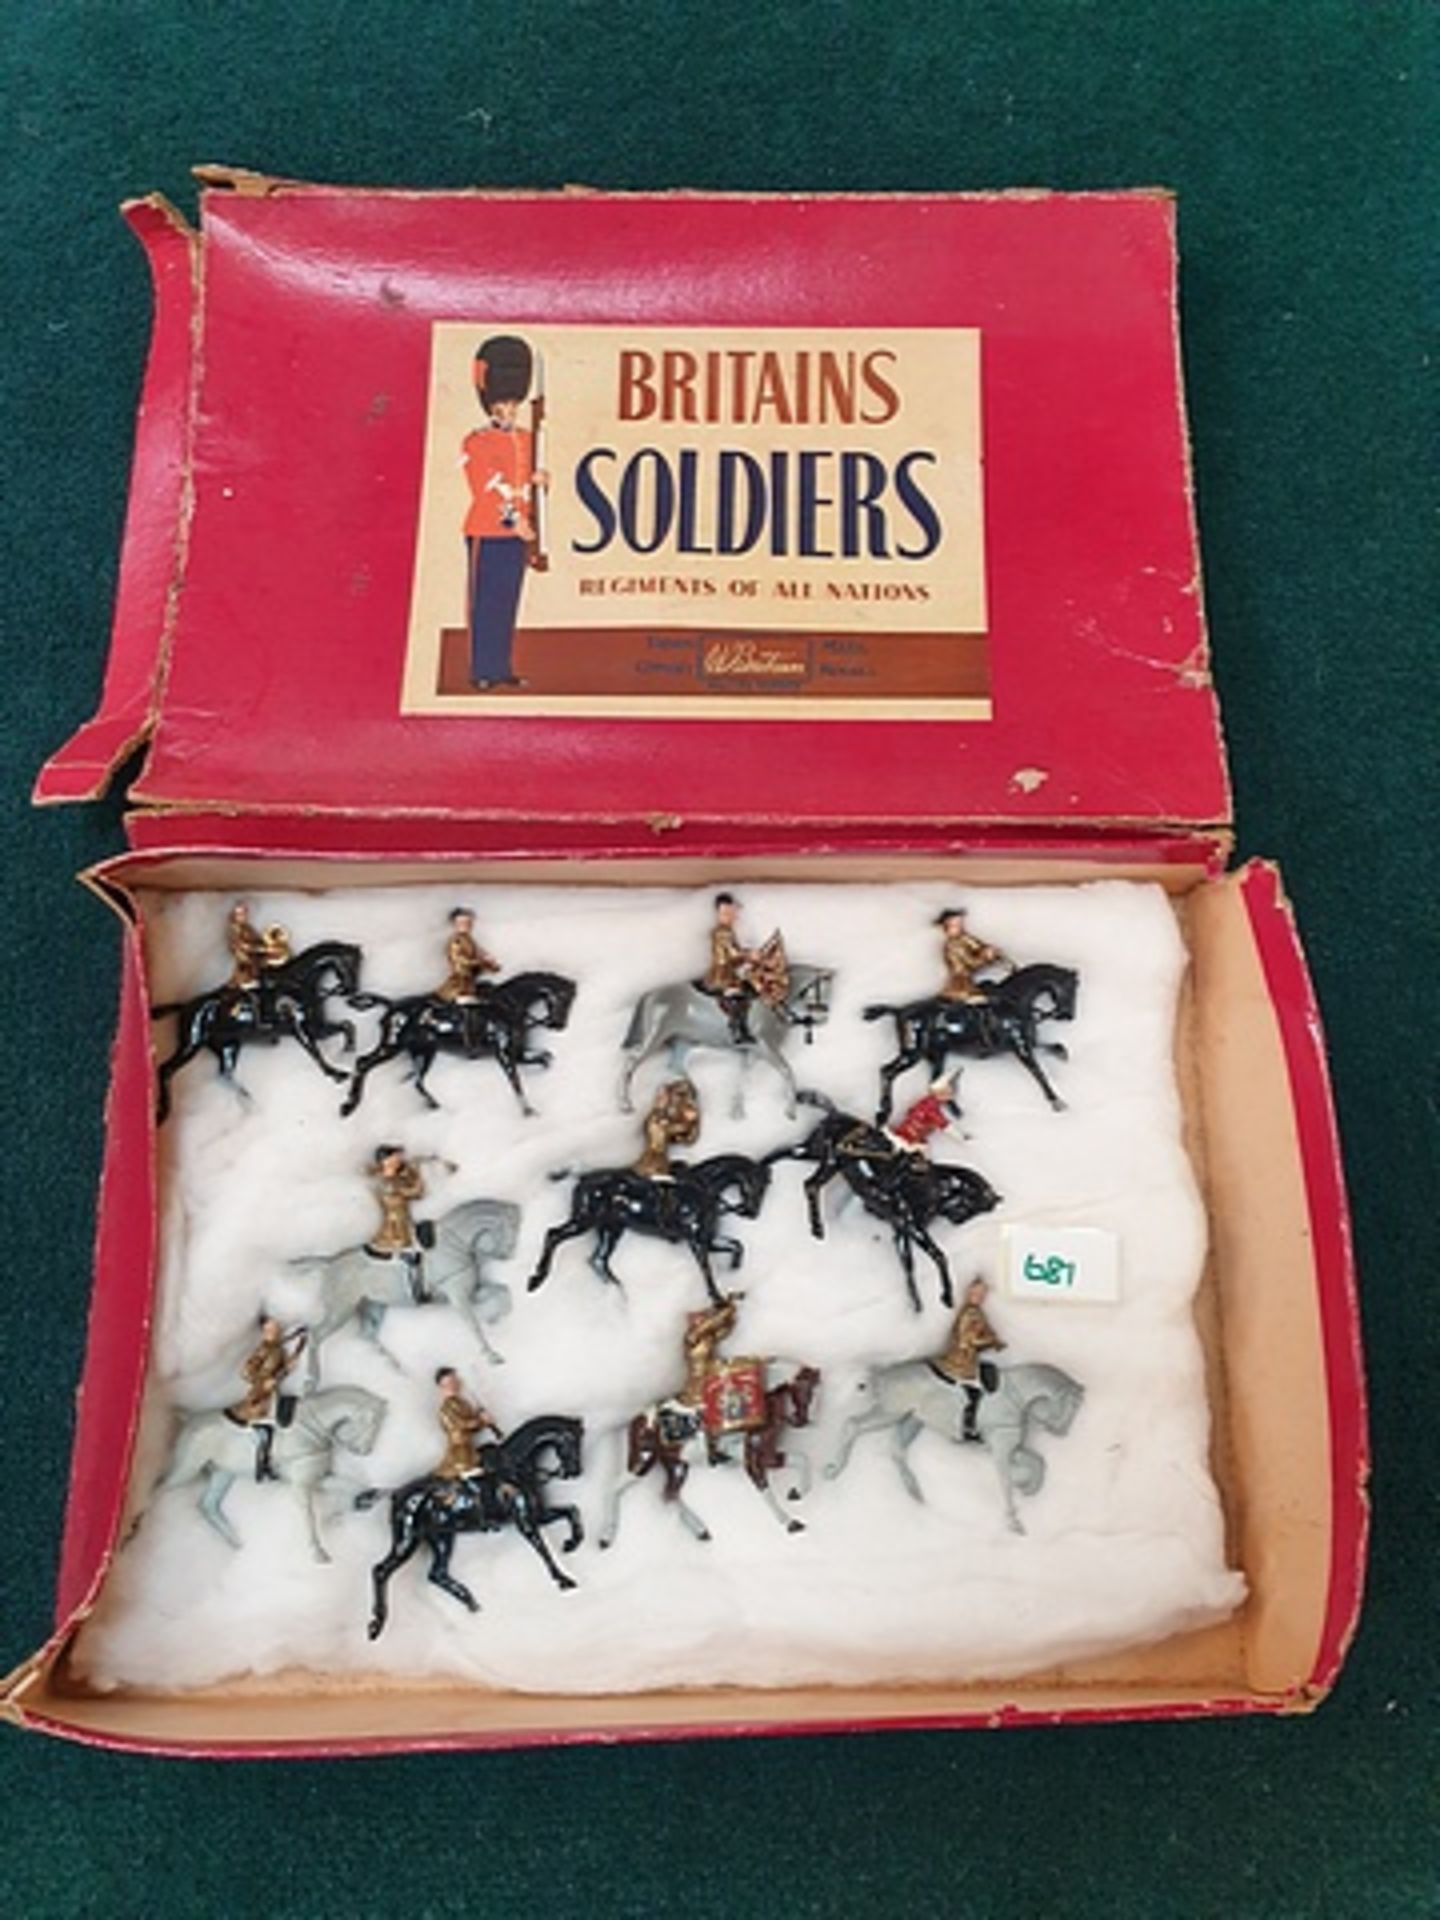 W Britain #101 Soldiers Regiments of all nations - The Band of the Life Guard complete with box